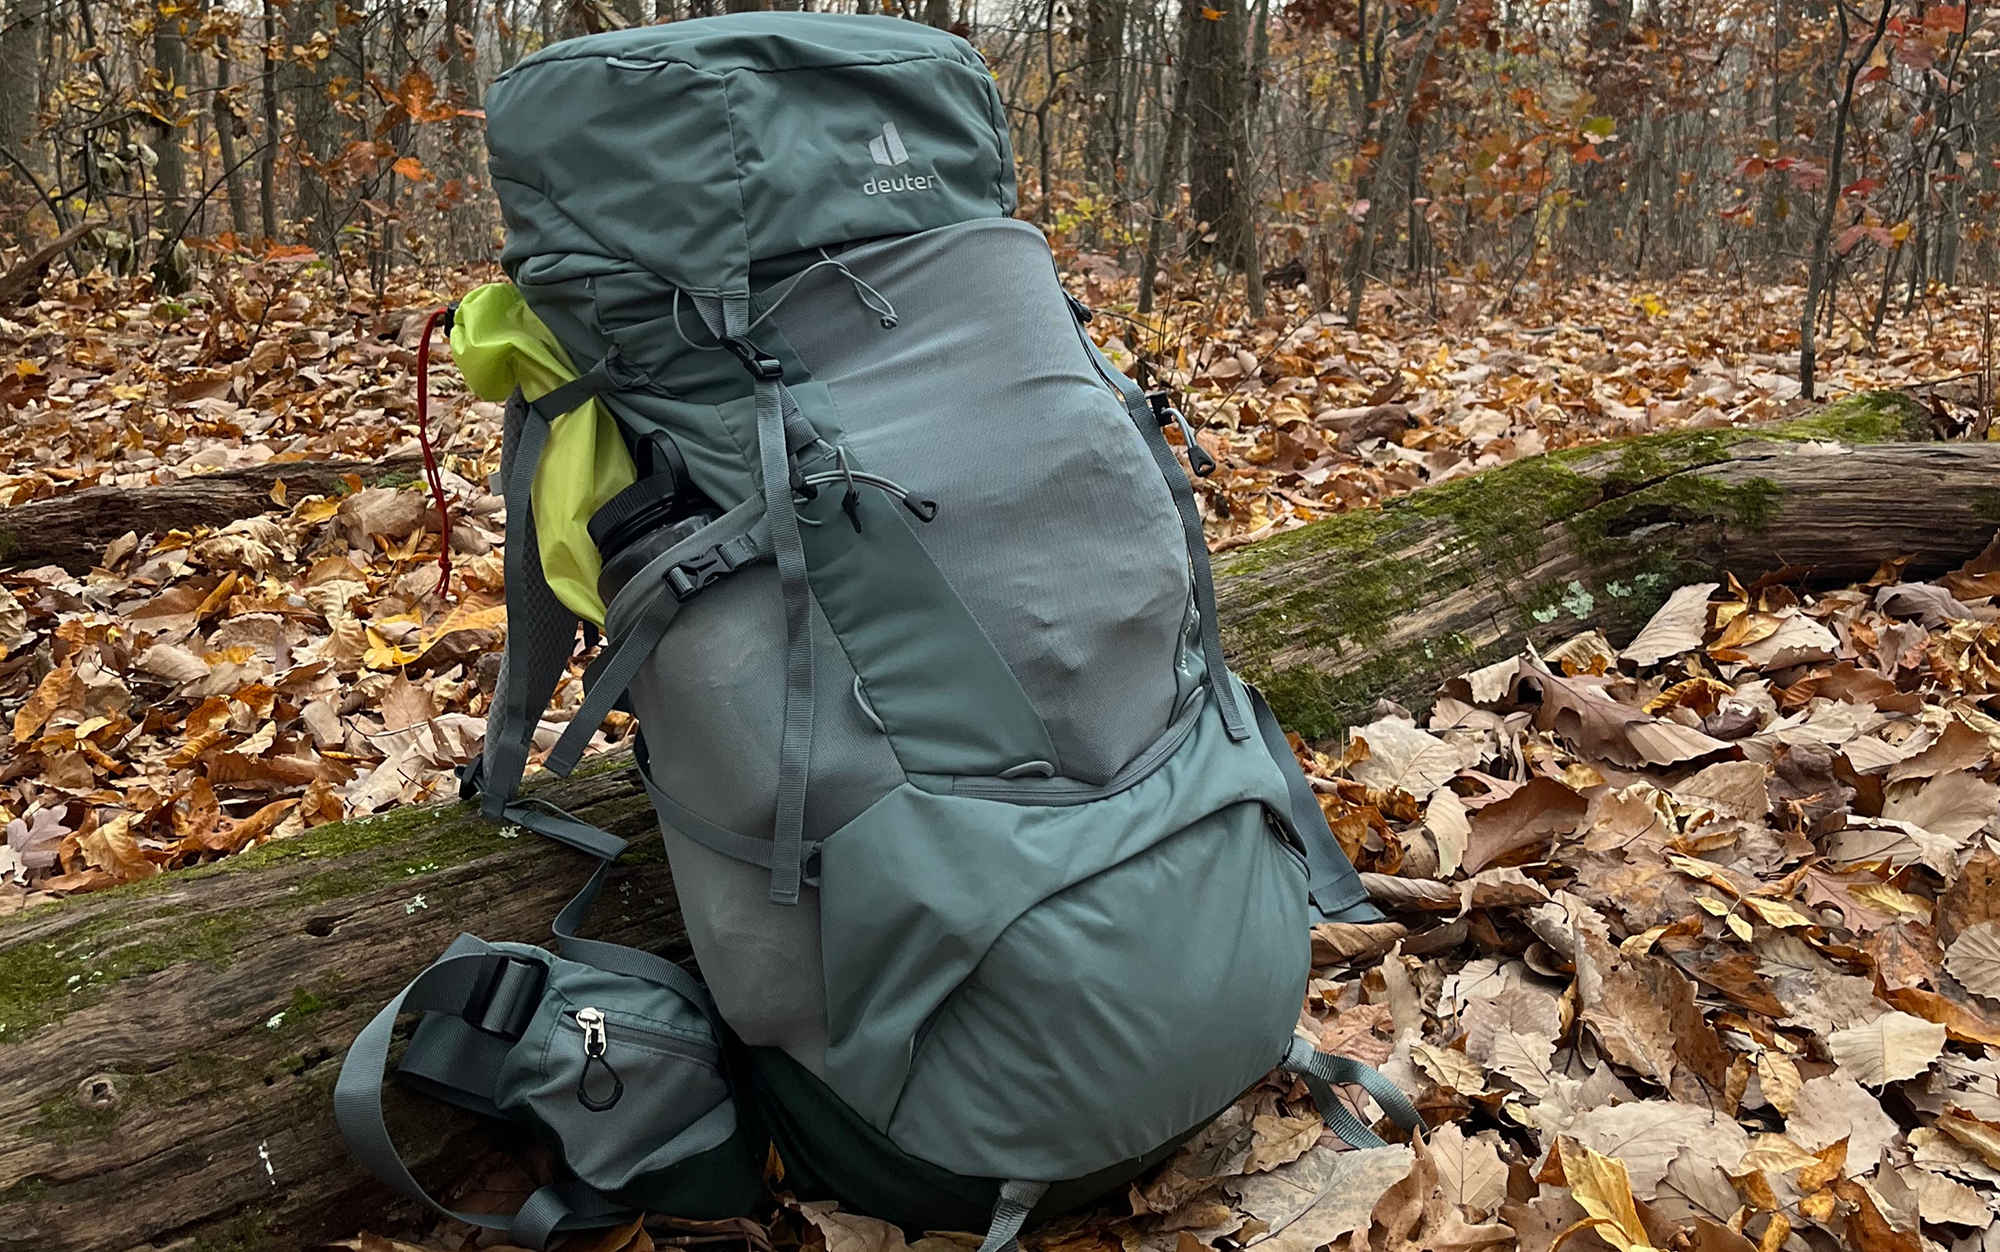 When not fully loaded, the top lid of the Deuter Aircontact would cover the opening of the front mesh pocket.